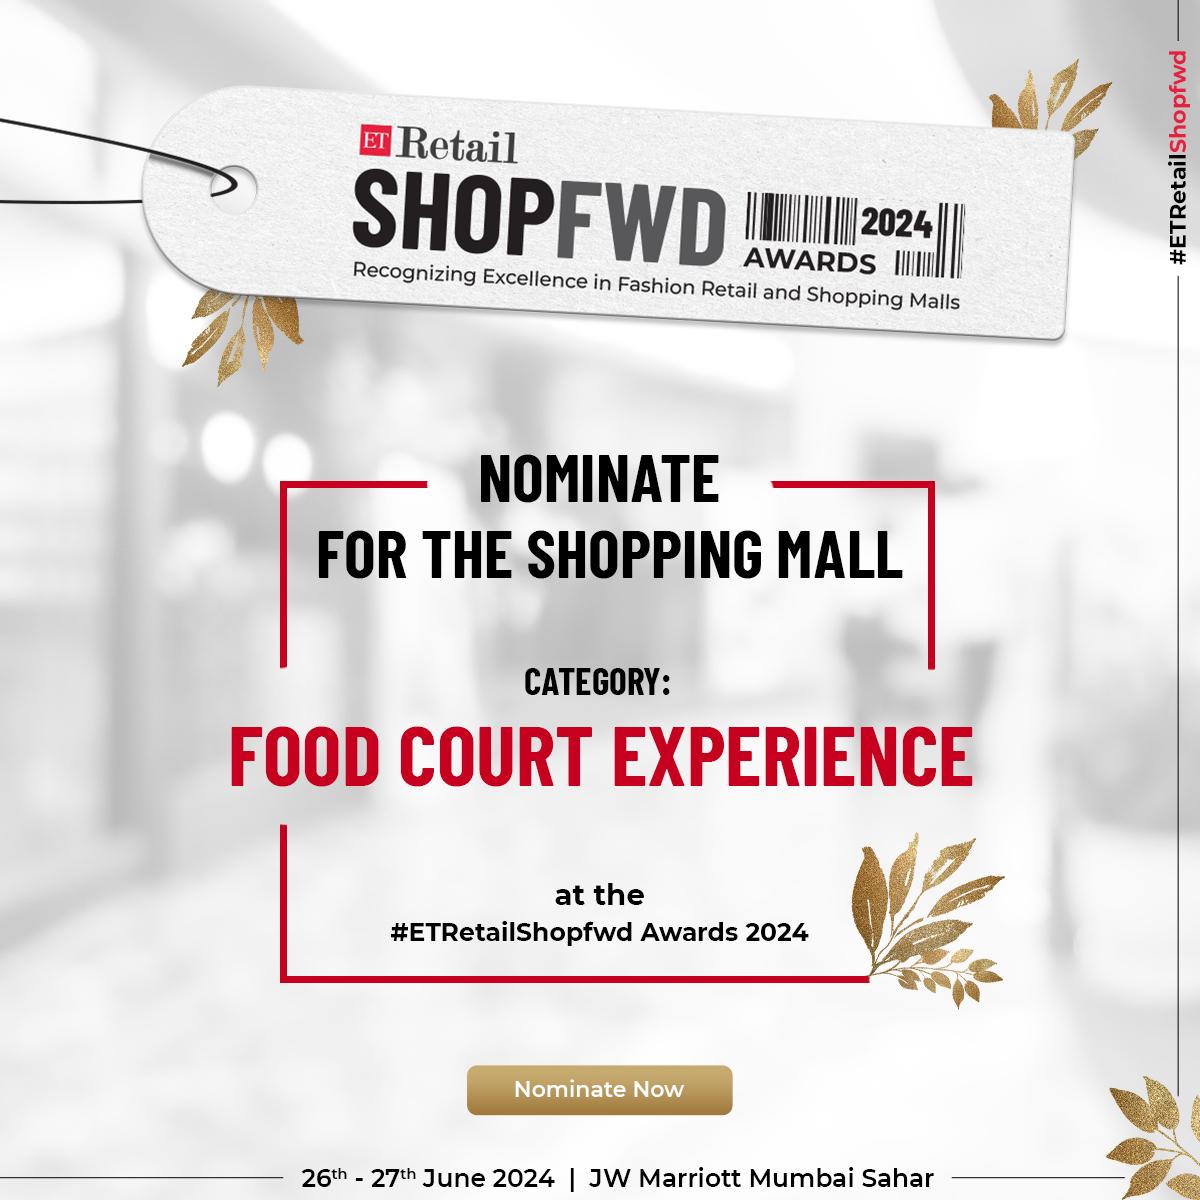 Nominate for the Shopping Mall: Food Court Experience category at the ET Retail Shopfwd Awards 2024

Nominate Now- bit.ly/3w99l1M  

#ETRetail #ETRetailShopFwd #ShopfwdAwards #RetailExcellence #ShoppingMalls #FashionRetailers #EarlyBirdOffers #SaveMore #Discounts #WinBig